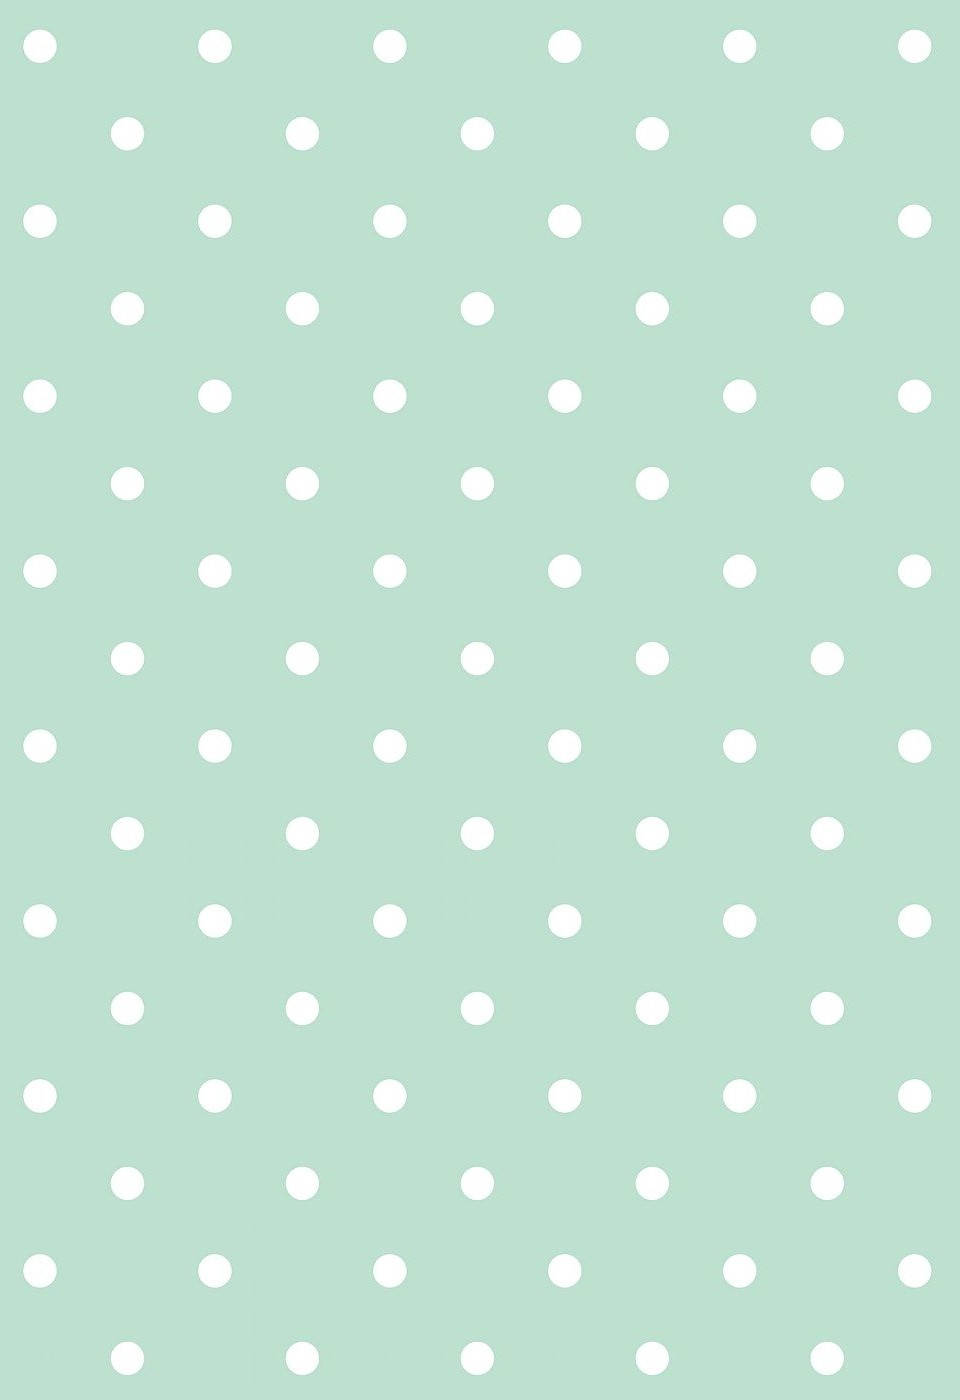 Mint Green 960X1400 Wallpaper and Background Image